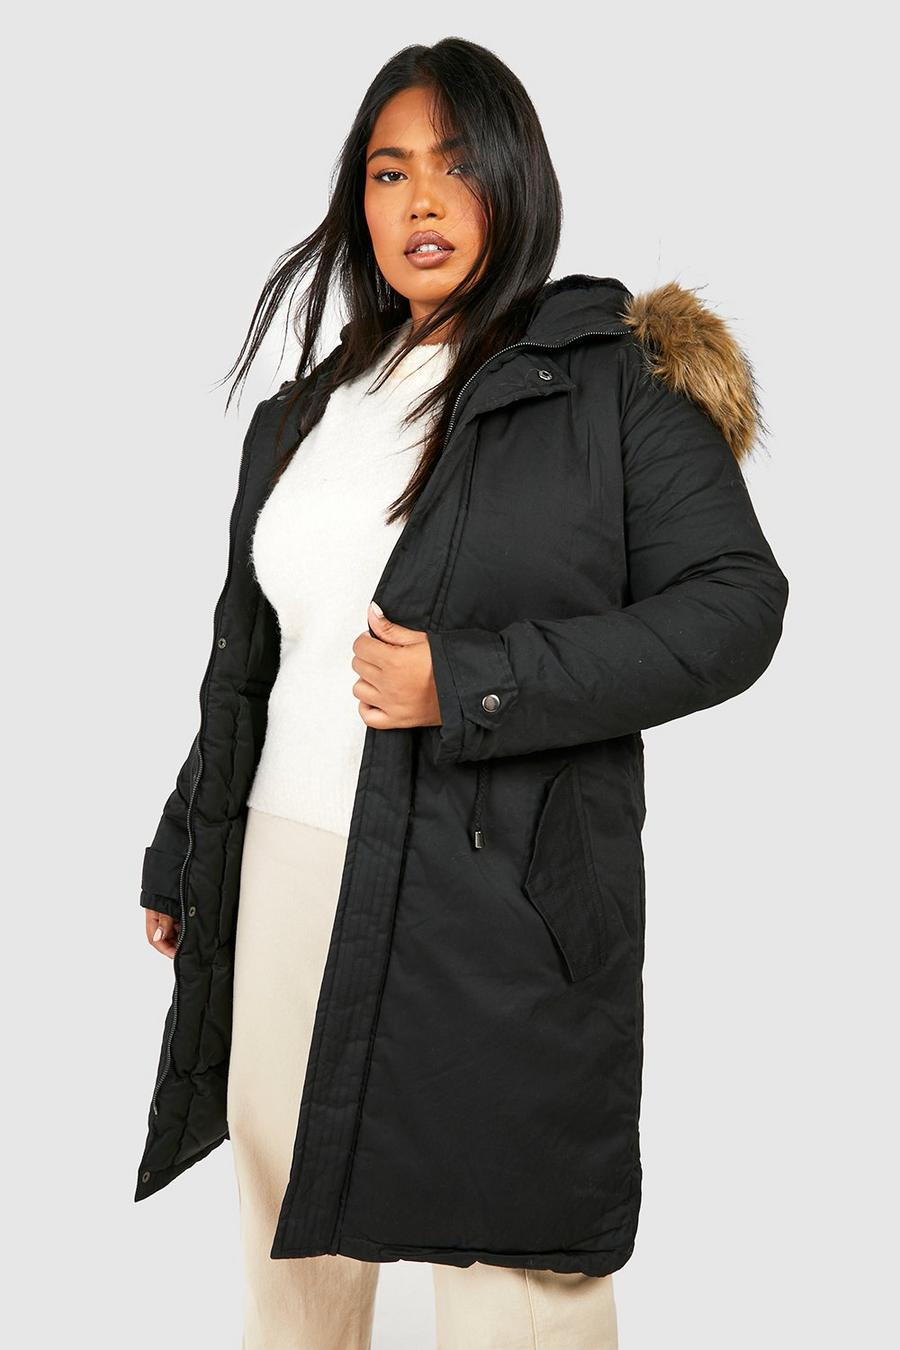 Plus Size Thick Fleece Lined Plush Hooded Windproof Warm Down Outerwear Jacket with Pockets Sczwkhg Women Winter Parka Coats 